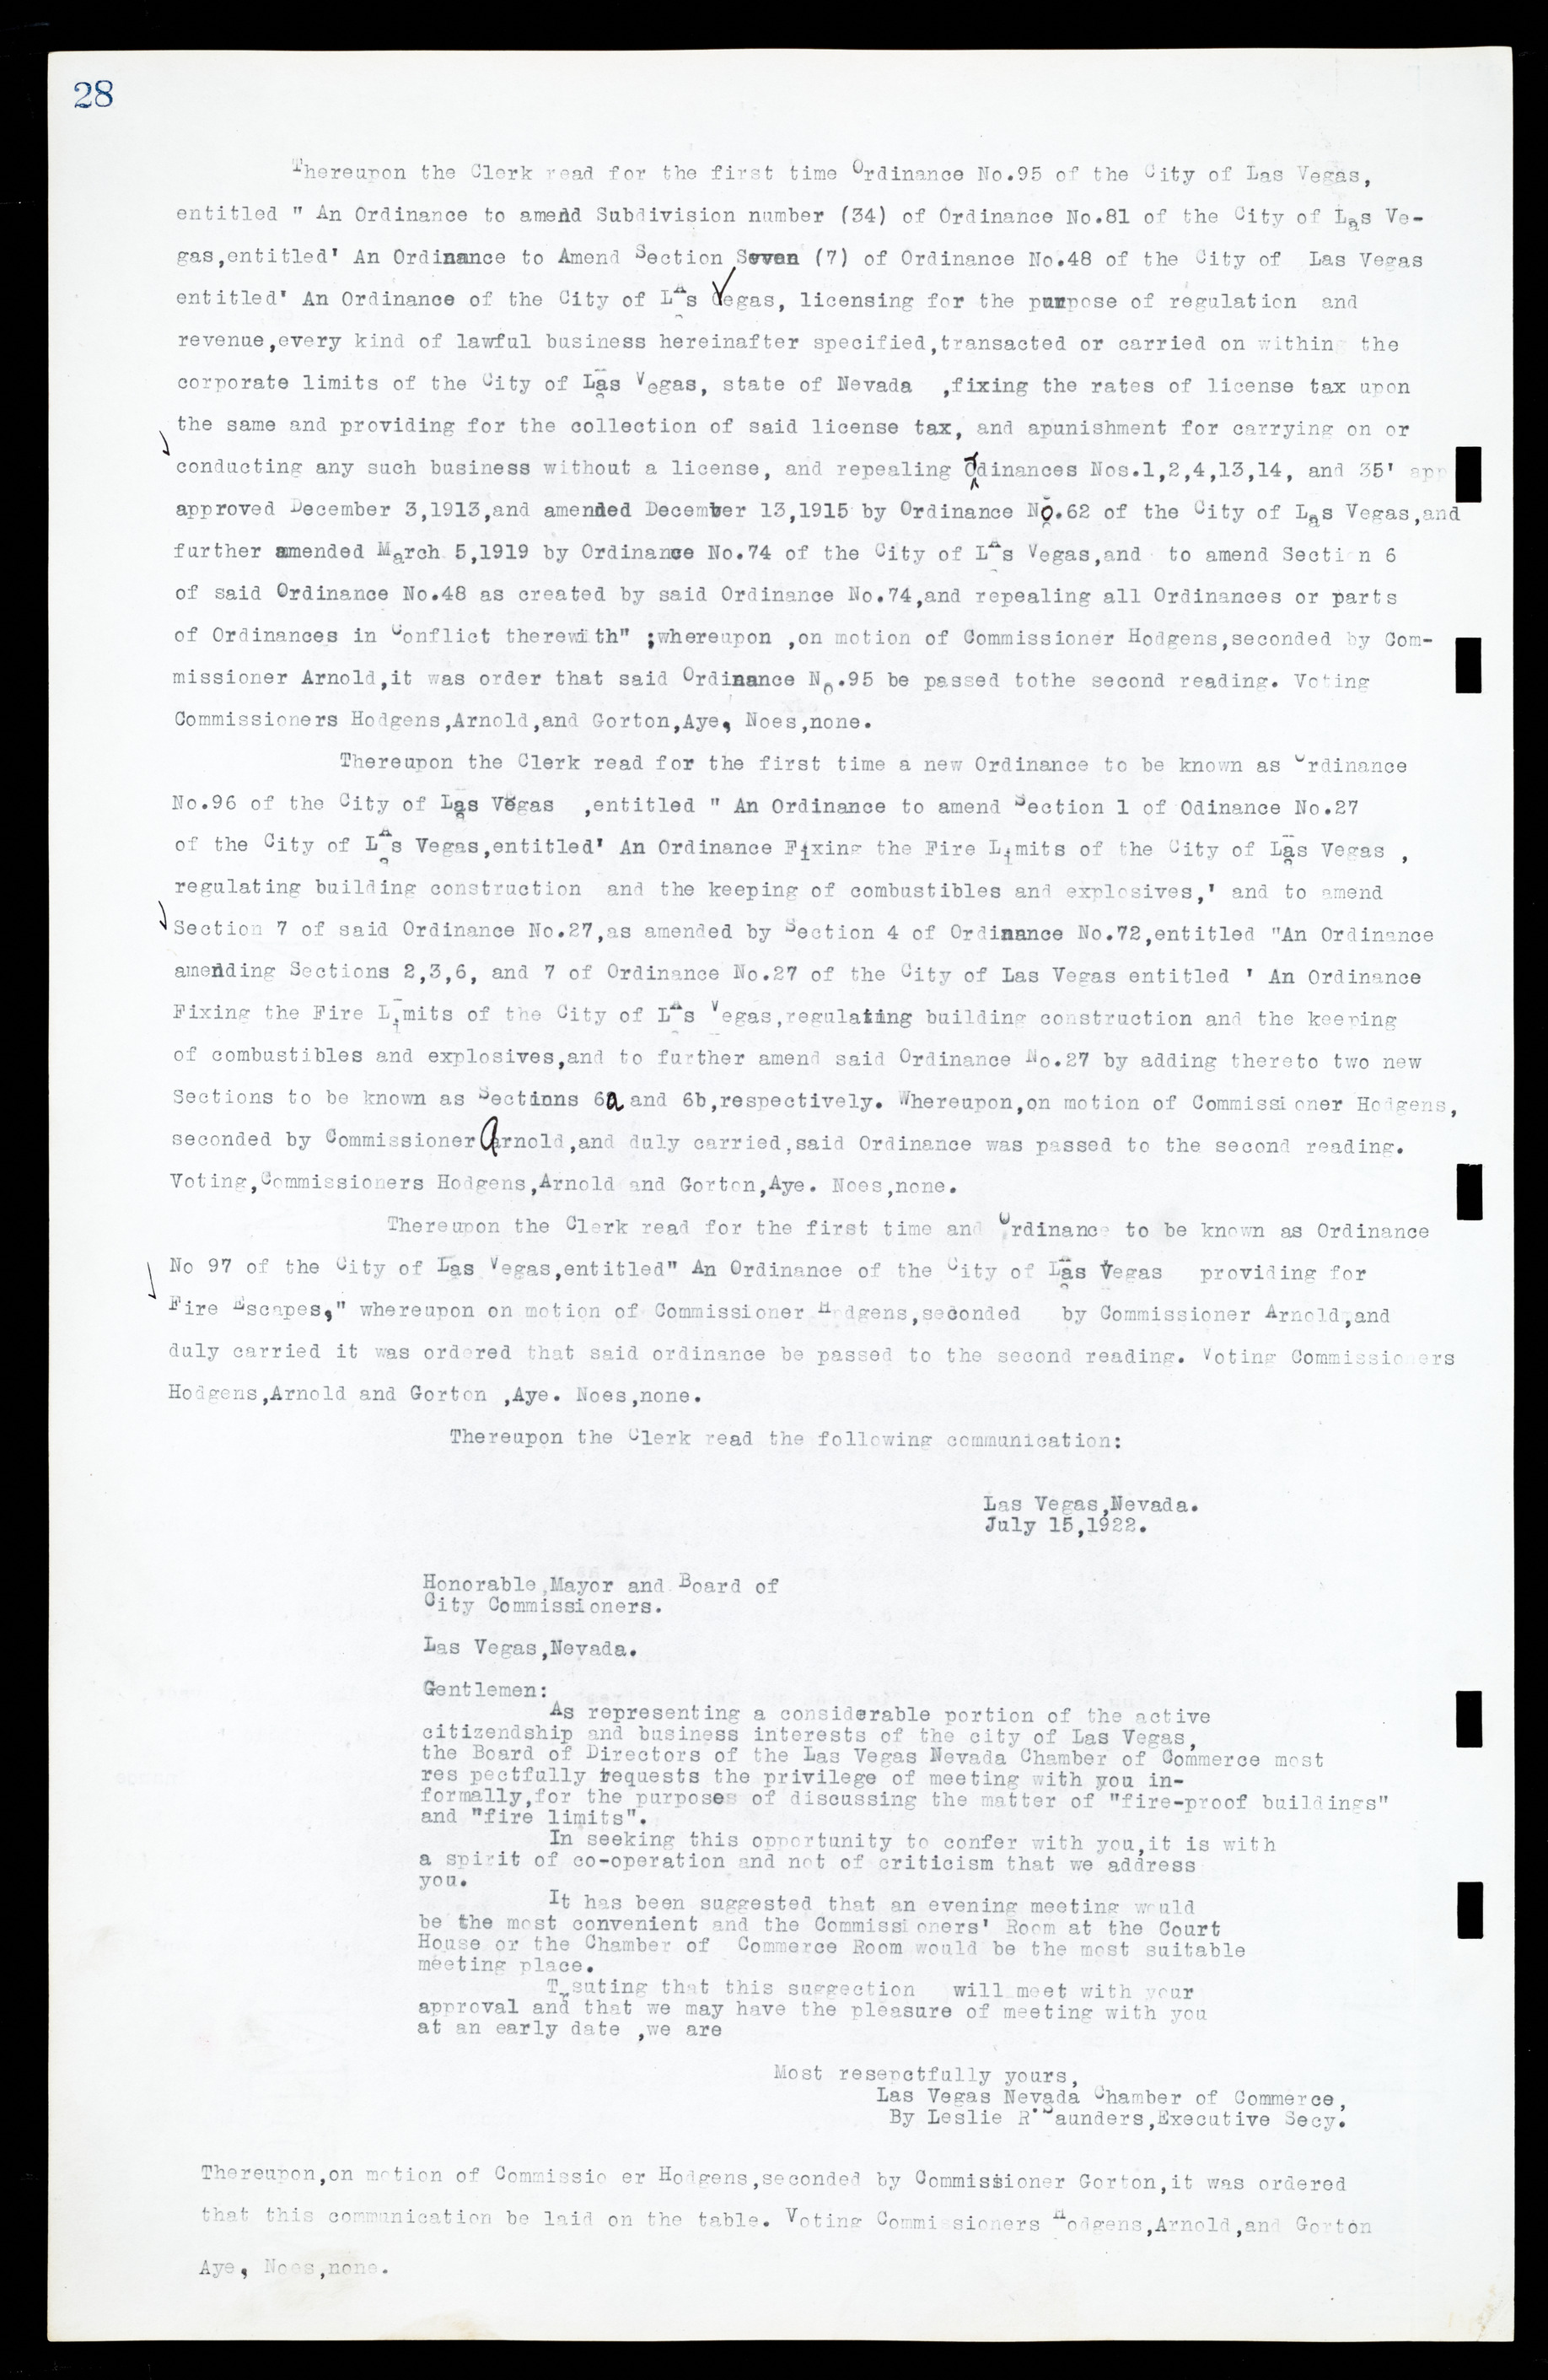 Las Vegas City Commission Minutes, March 1, 1922 to May 10, 1929, lvc000002-35